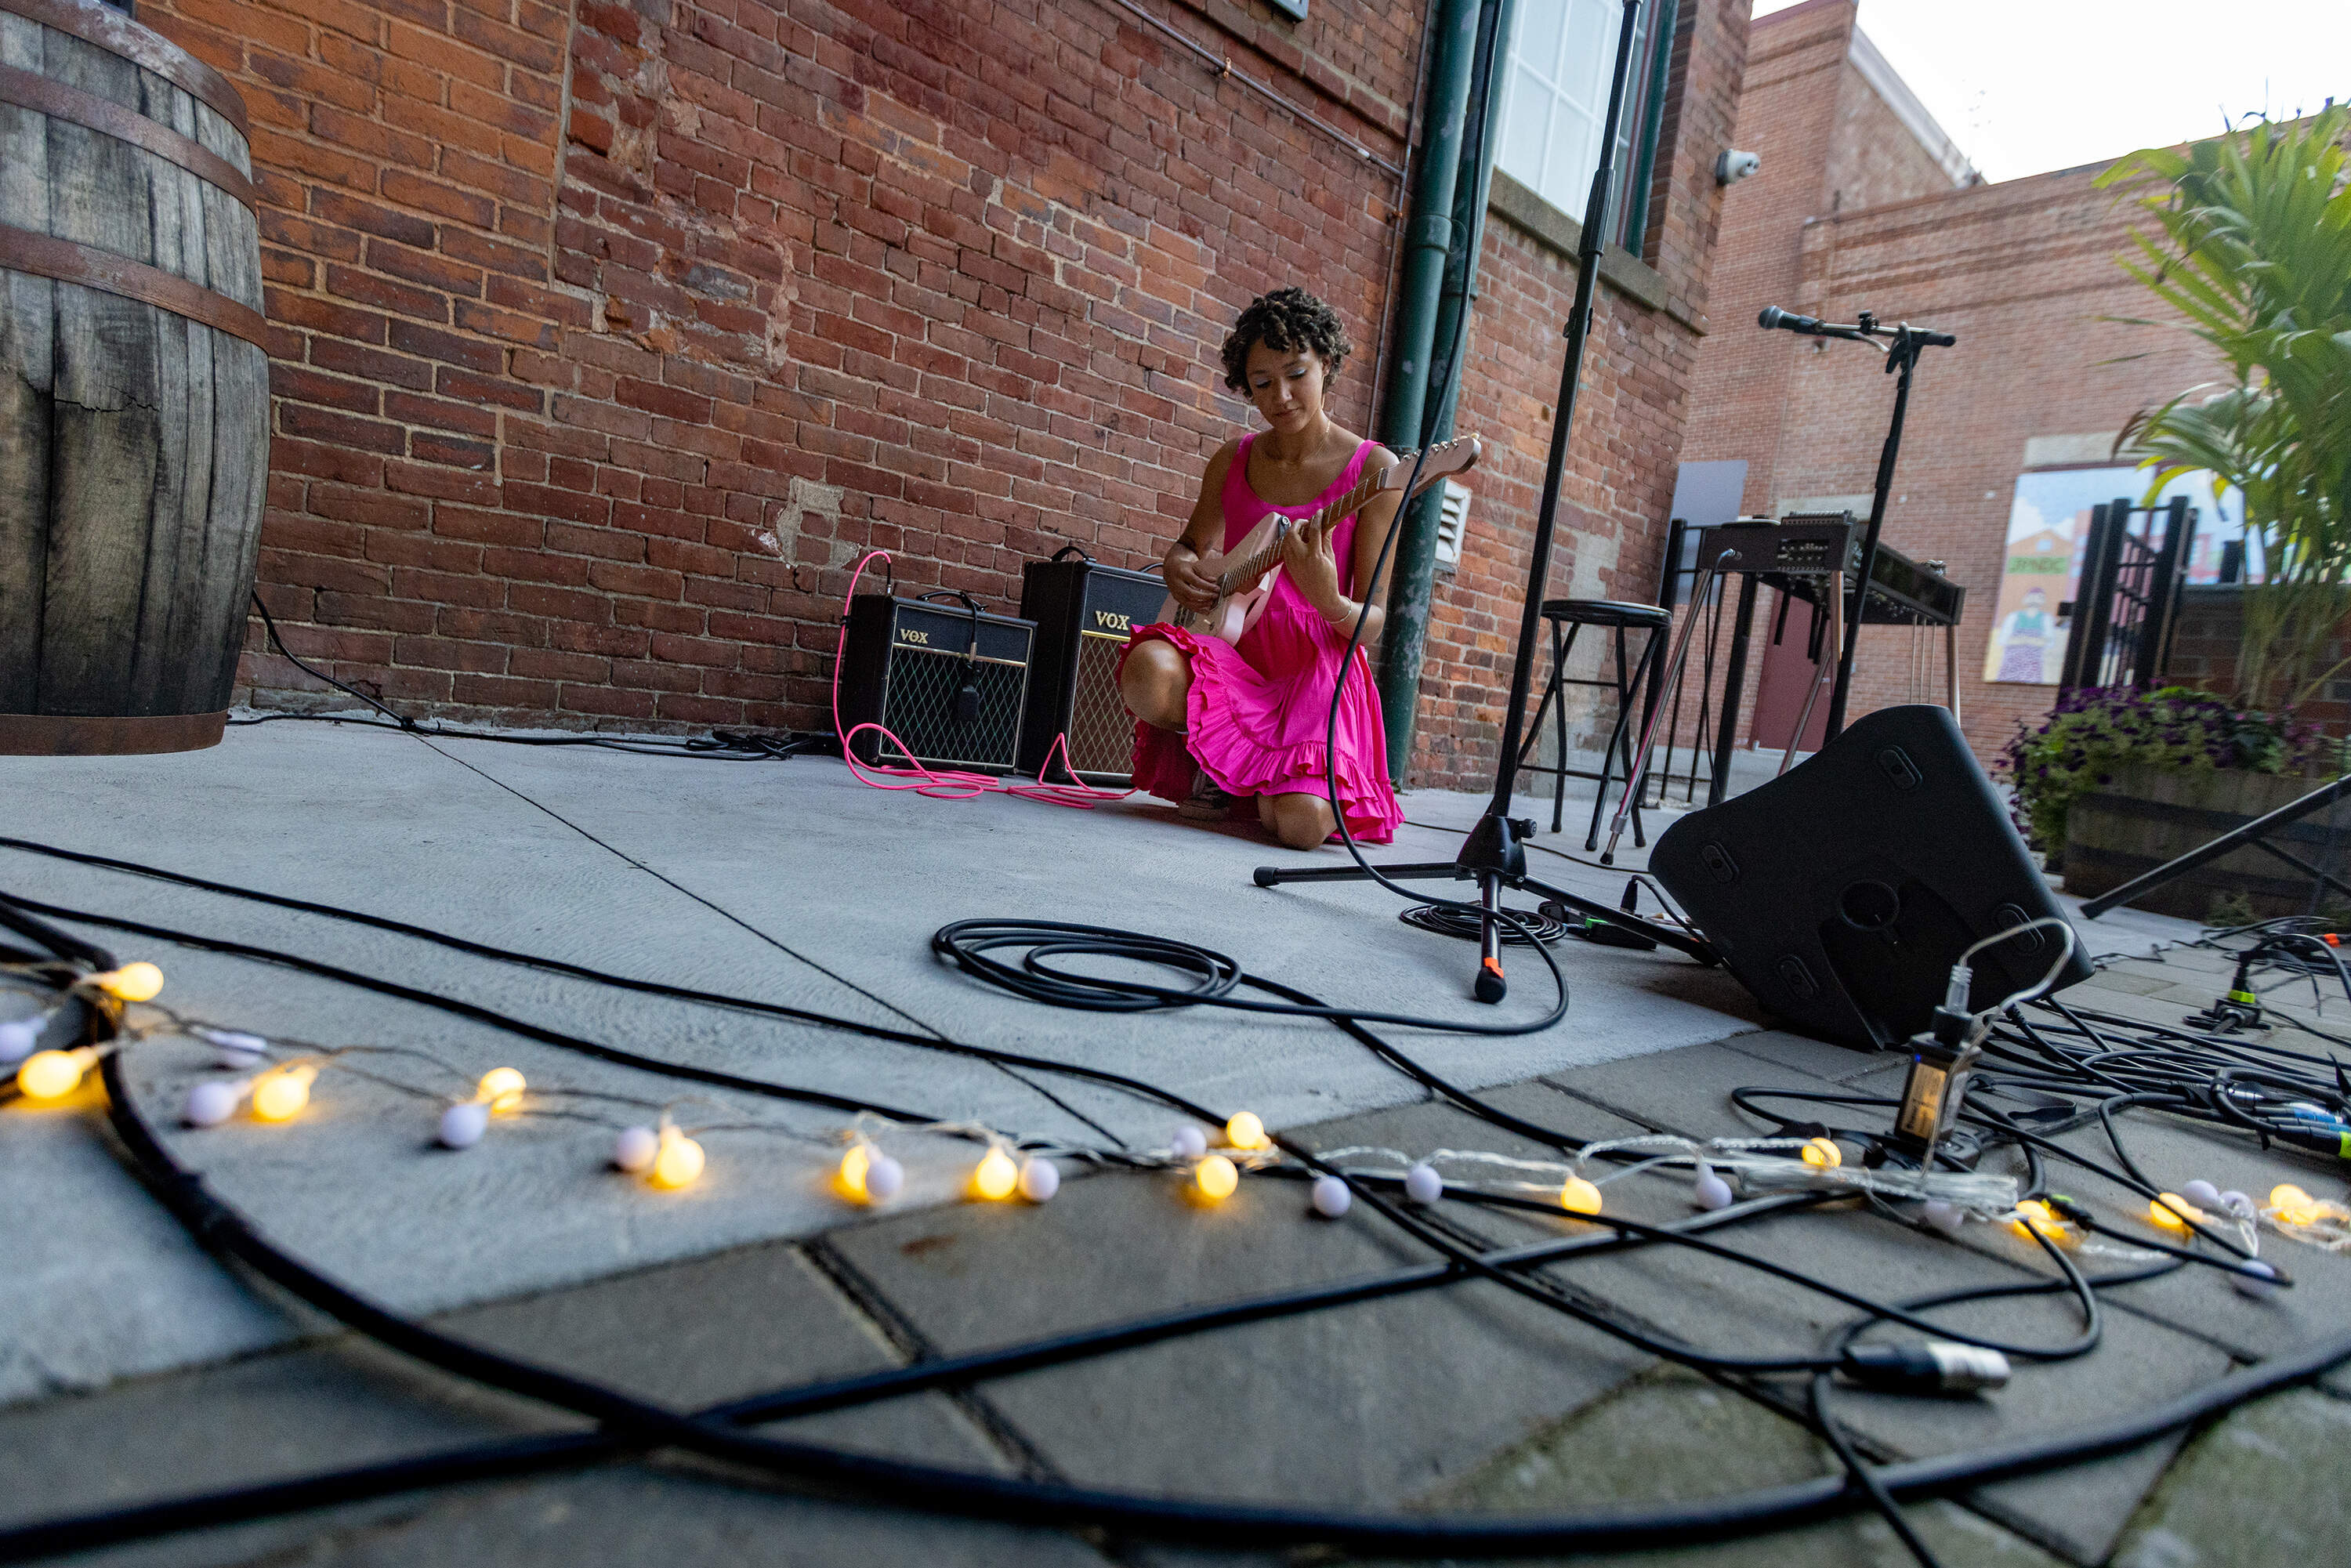 Kimaya Diggs tunes her guitar before going on stage at a Sofar Sounds night at Sam Adams Brewery in Jamaica Plain. (Jesse Costa/WBUR)